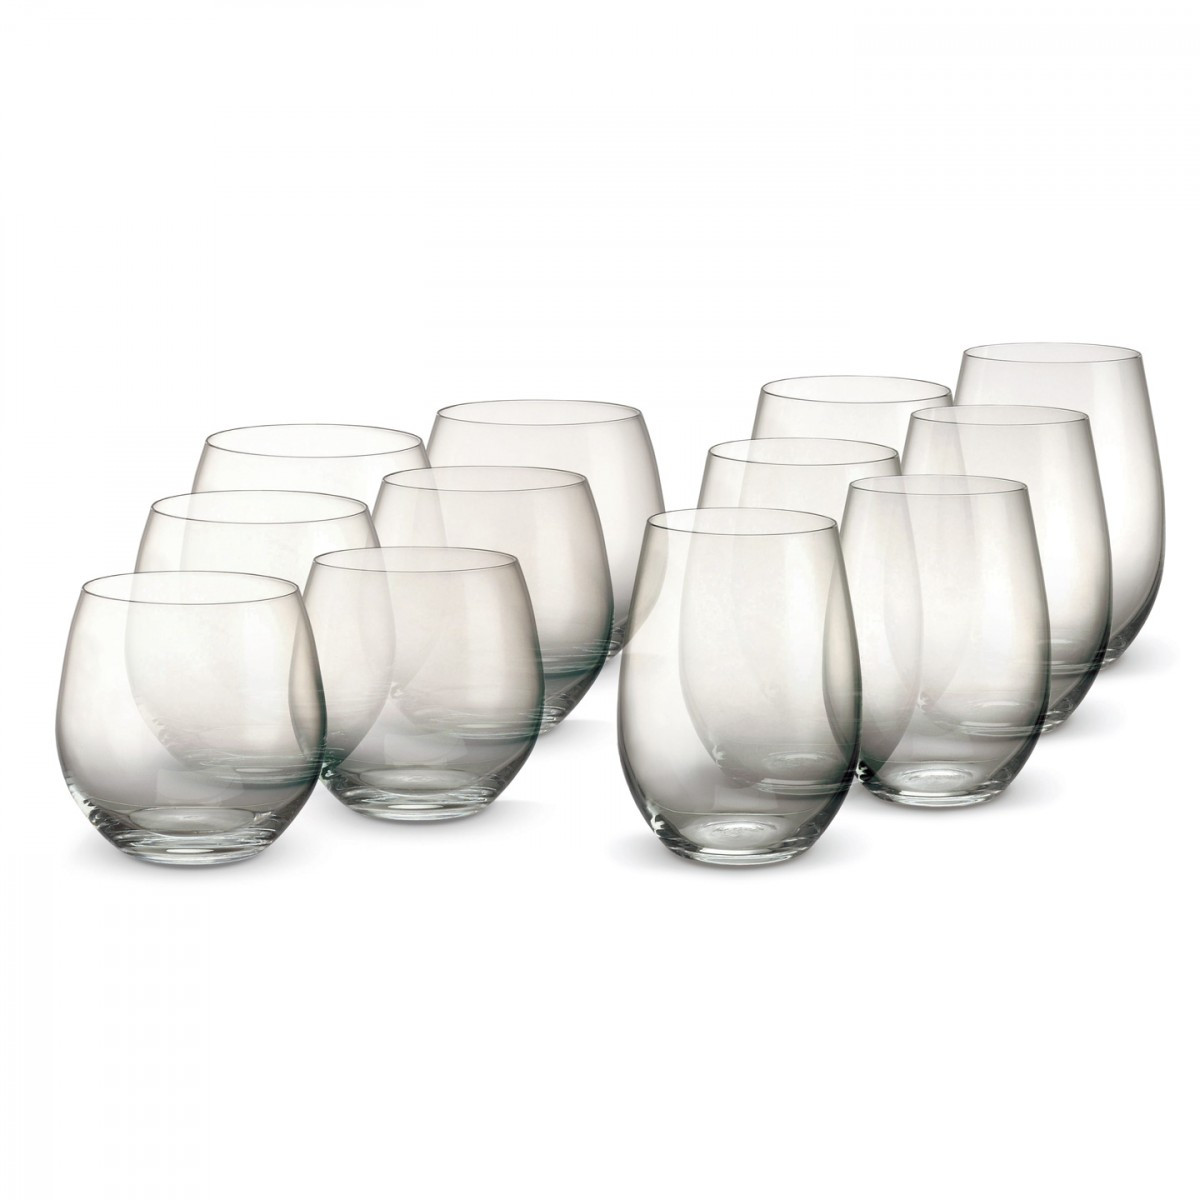 25 attractive Marquis by Waterford Shelton Vase 12 2024 free download marquis by waterford shelton vase 12 of vintage stemless wine set of 12 marquis by waterford us in vintage stemless wine set of 12